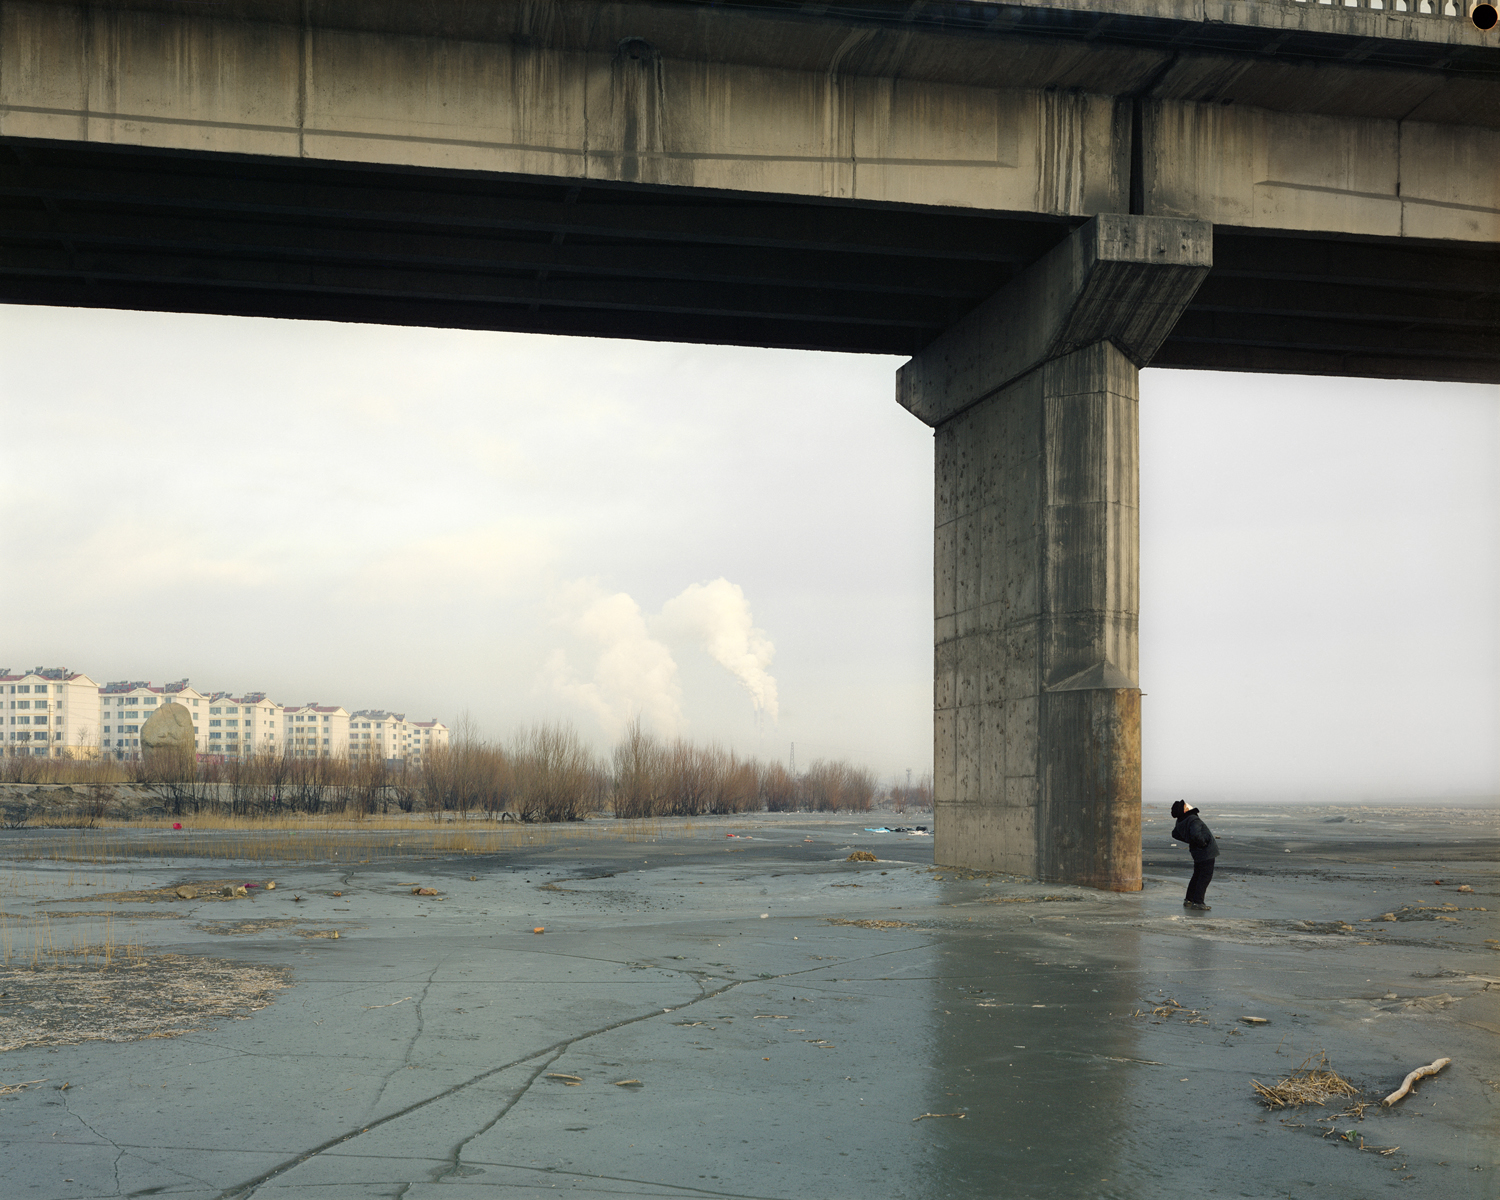 image: A man doing his morning exercises under the bridge, Ningxia province.